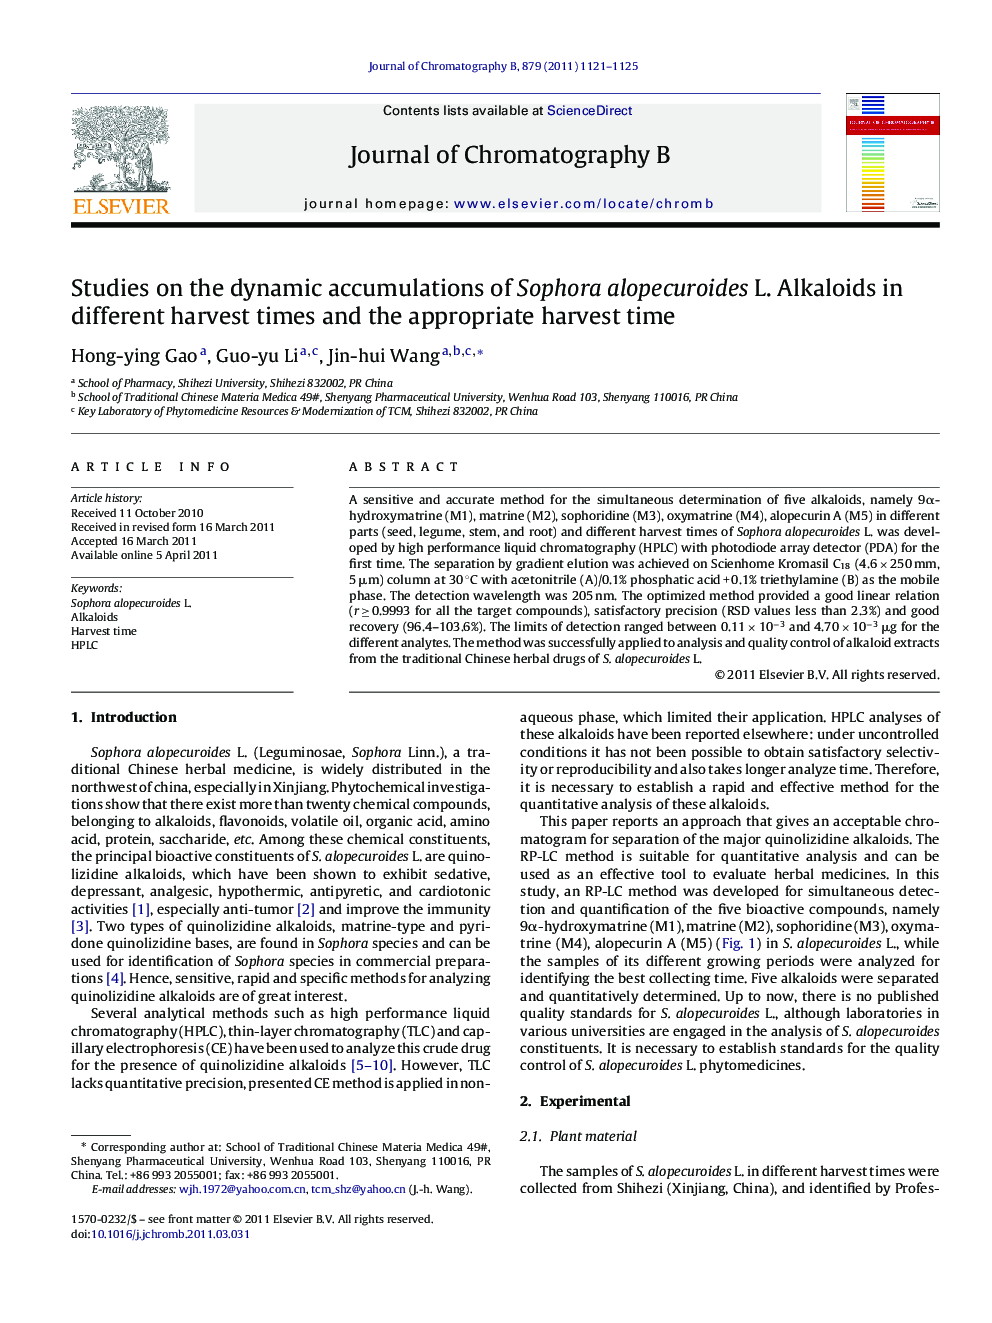 Studies on the dynamic accumulations of Sophora alopecuroides L. Alkaloids in different harvest times and the appropriate harvest time